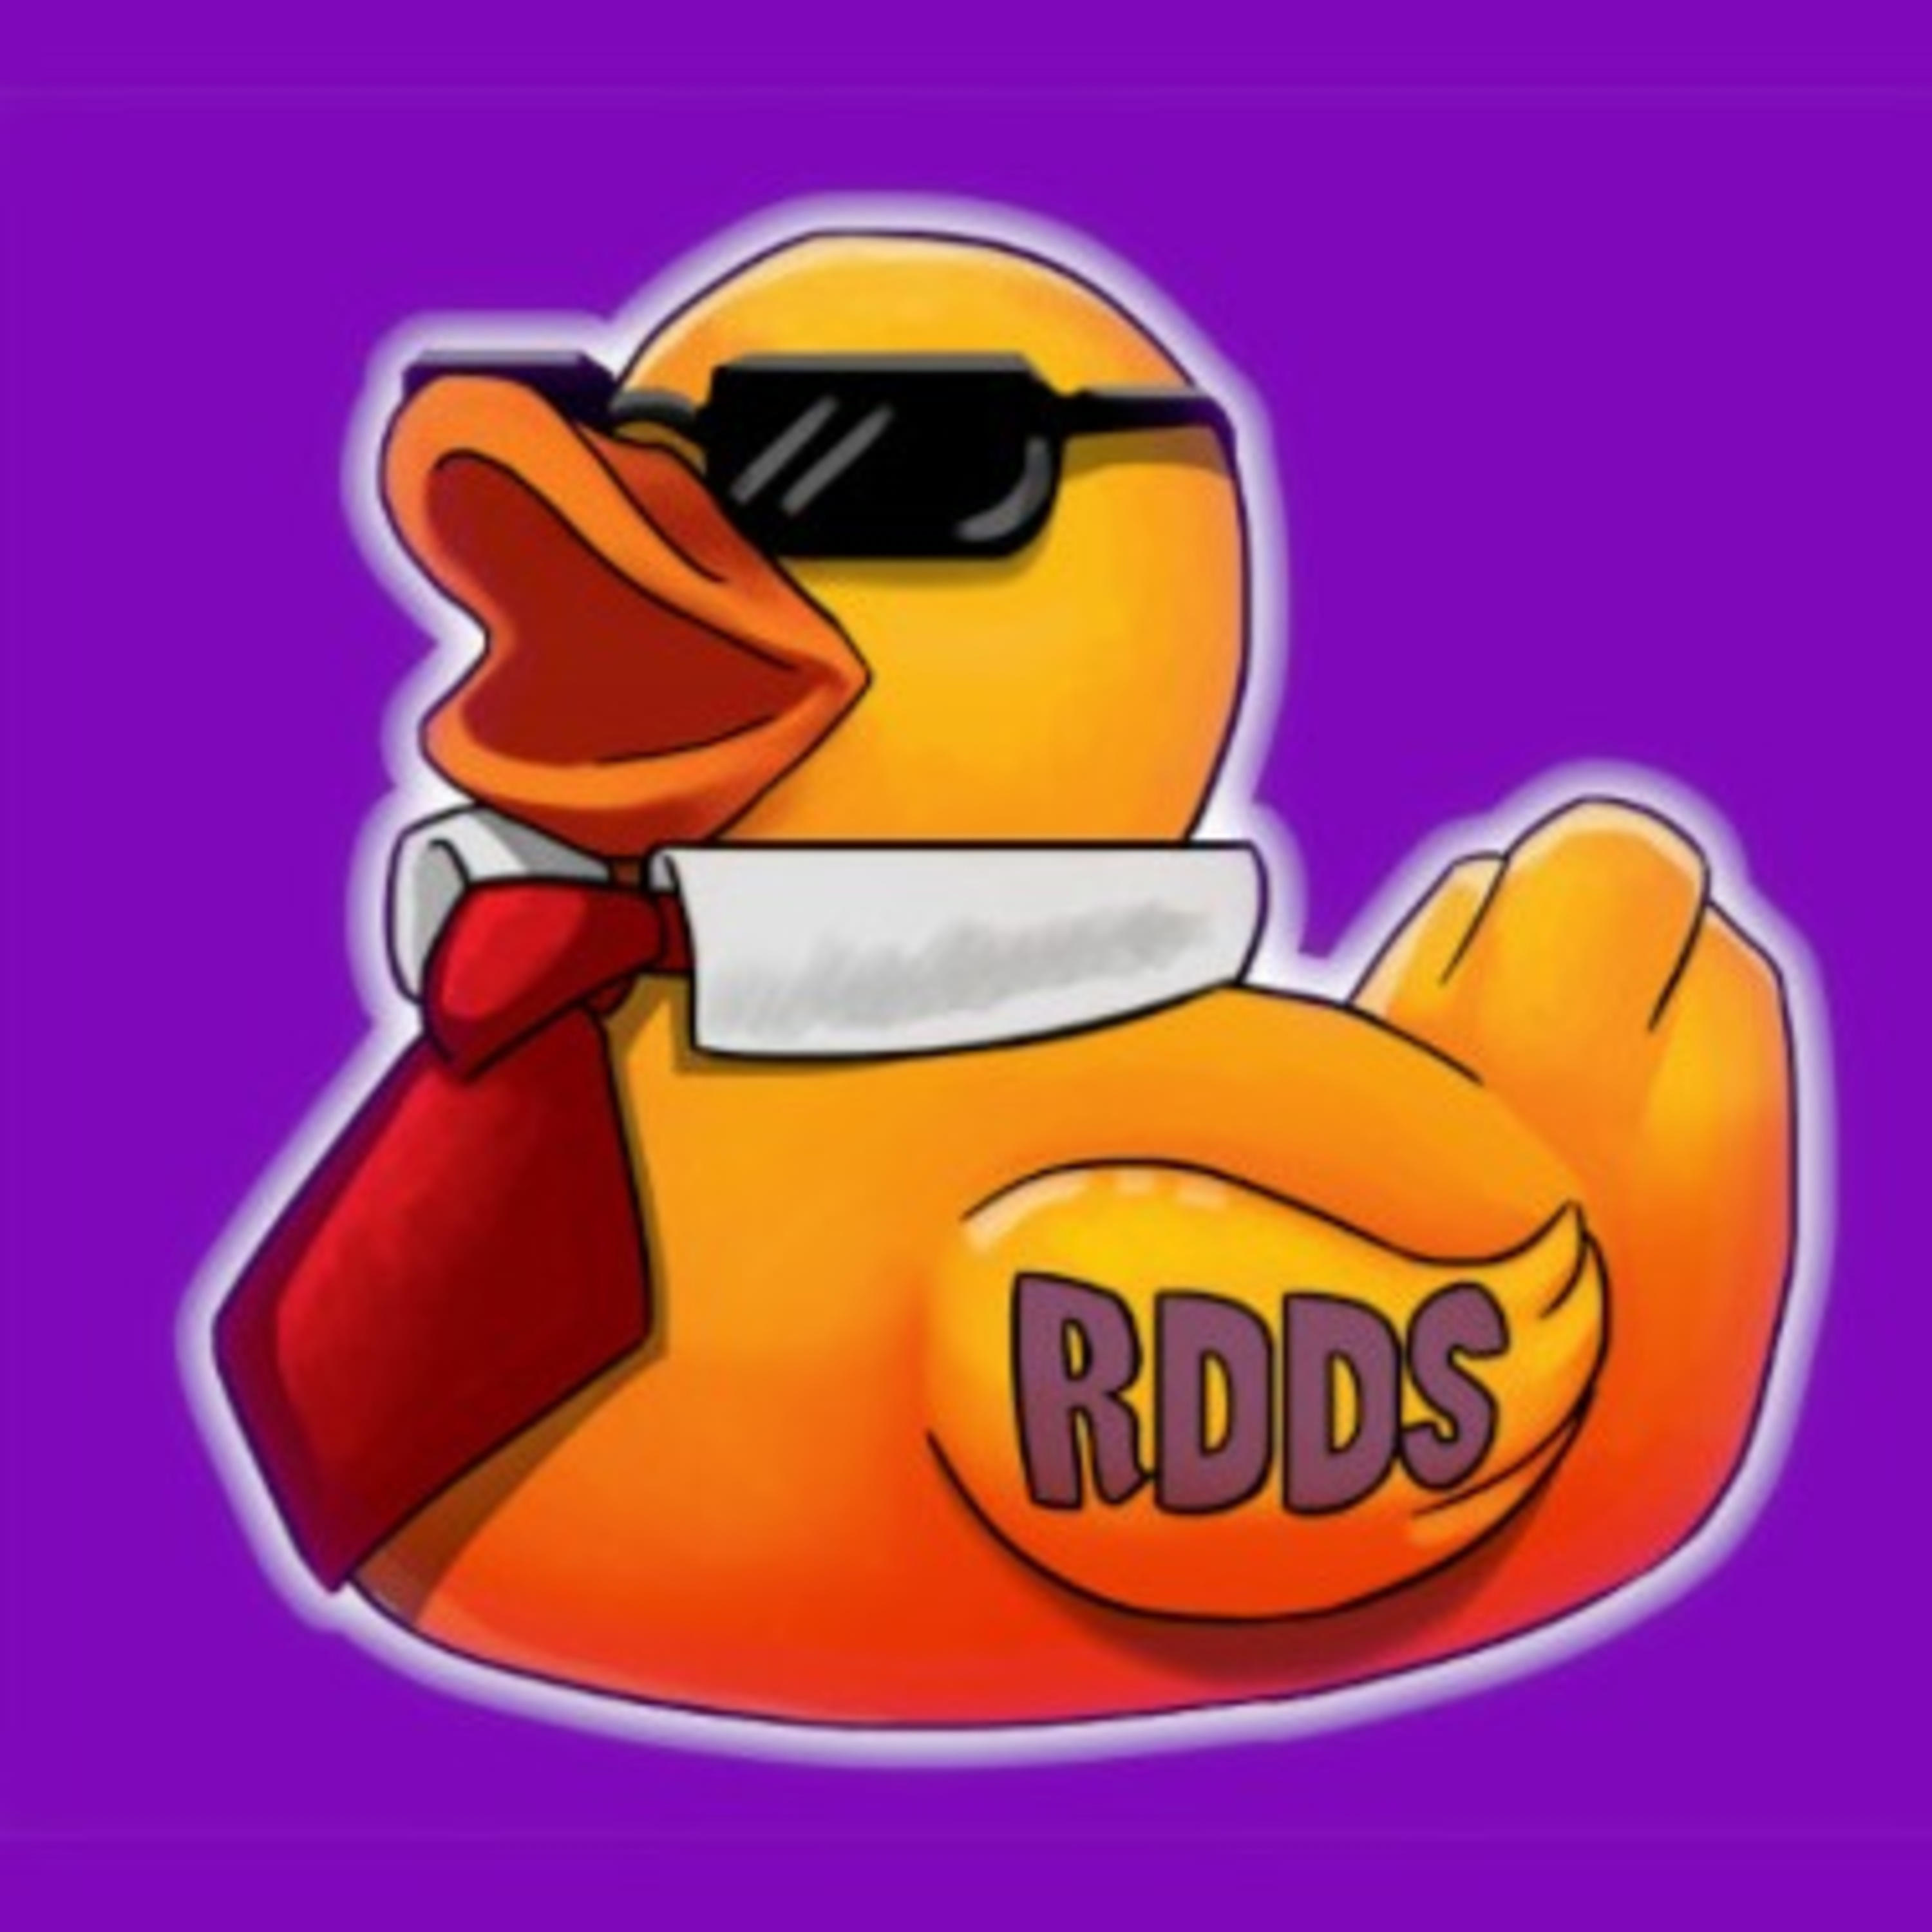 Looking Back On 100 Episodes! | Rubber Duck Dev Show 100